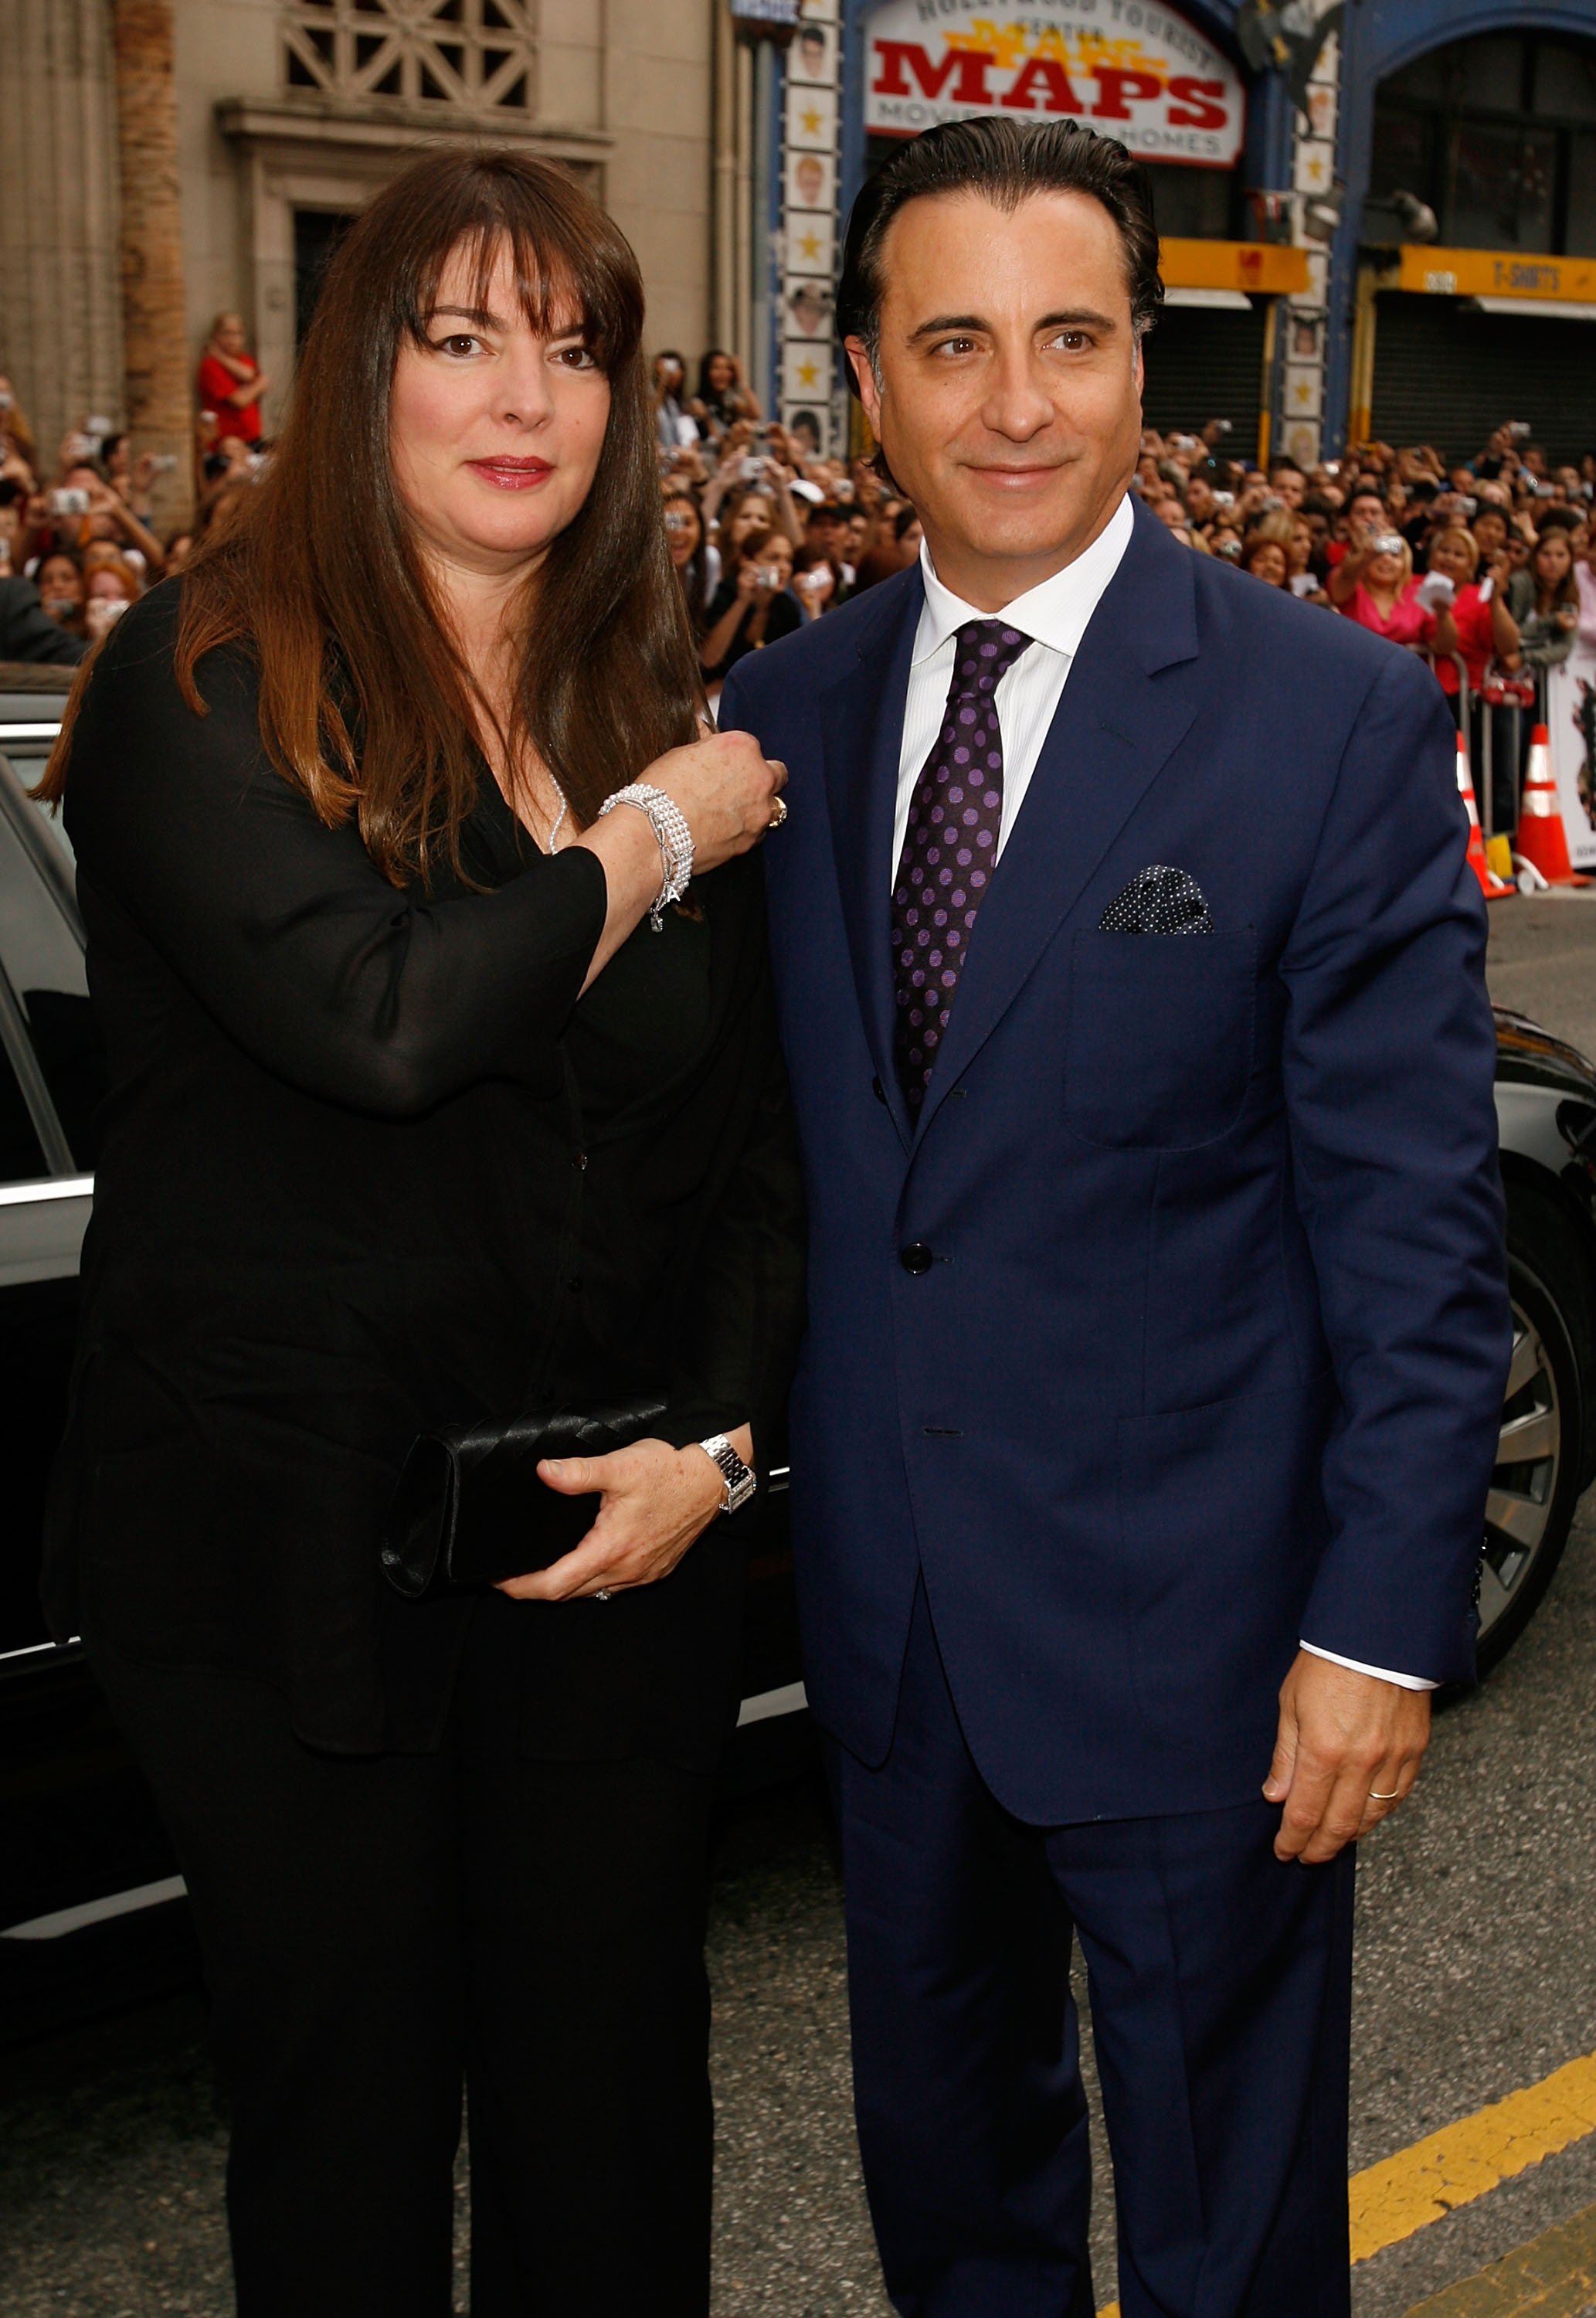 Actor Andy Garcia  and wife Marivi Lorido Garcia arrive at the Warner Bros. premiere of the film "Ocean's 13" at Grauman's Chinese Theater on June 5, 2007 in Hollywood, California | Source: Getty Images